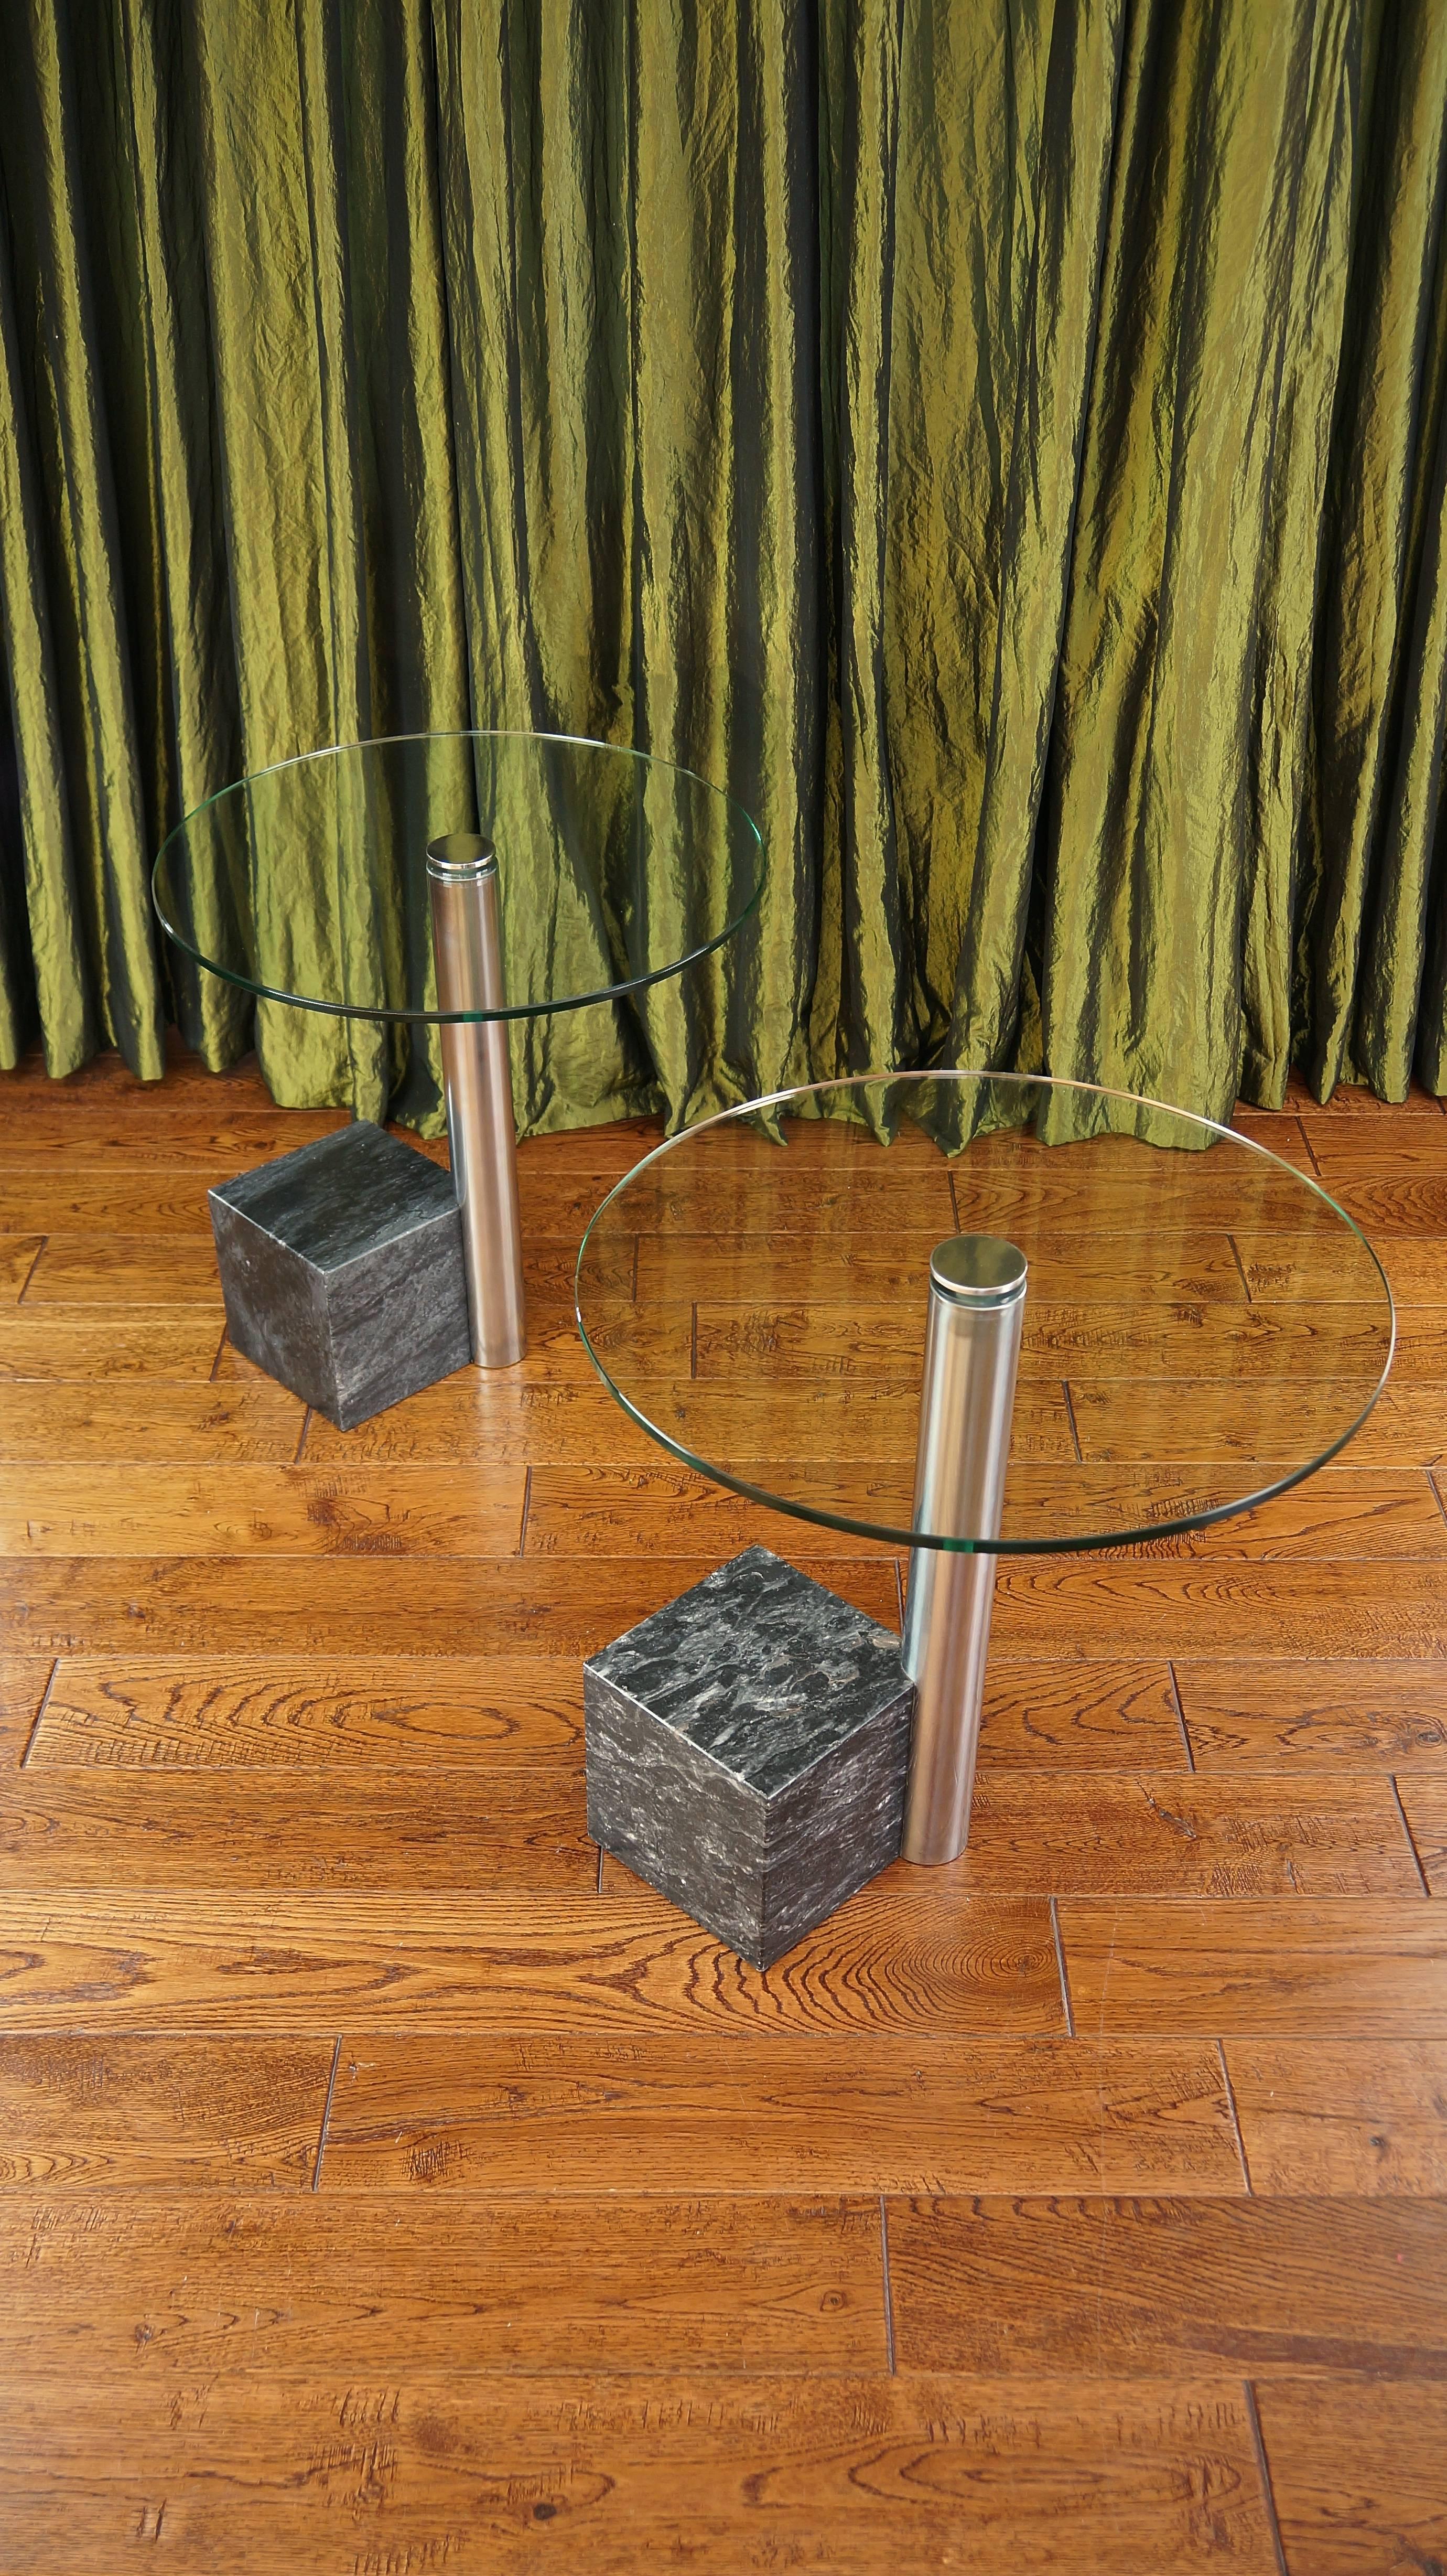 Pair of Vintage Marble and Glass HK2 Side Tables by Hank Kwint, Metaform 1980s For Sale 3